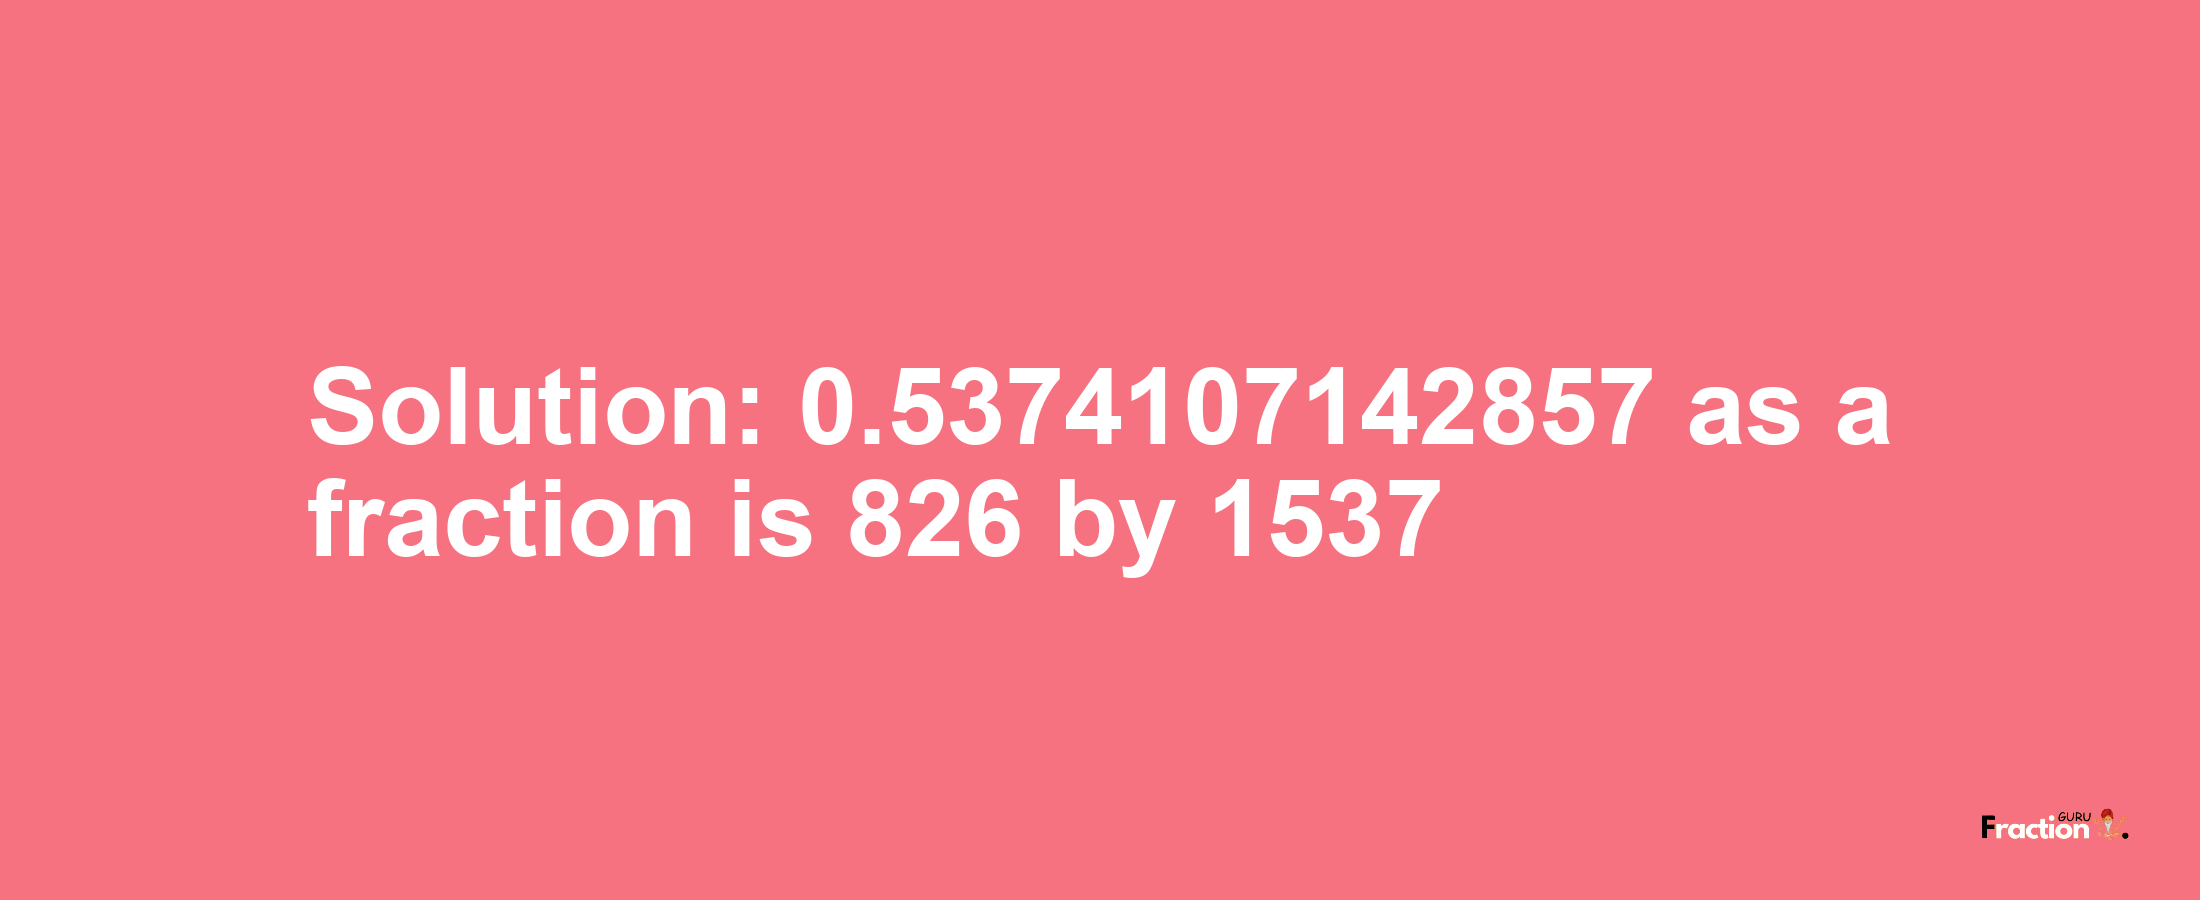 Solution:0.5374107142857 as a fraction is 826/1537